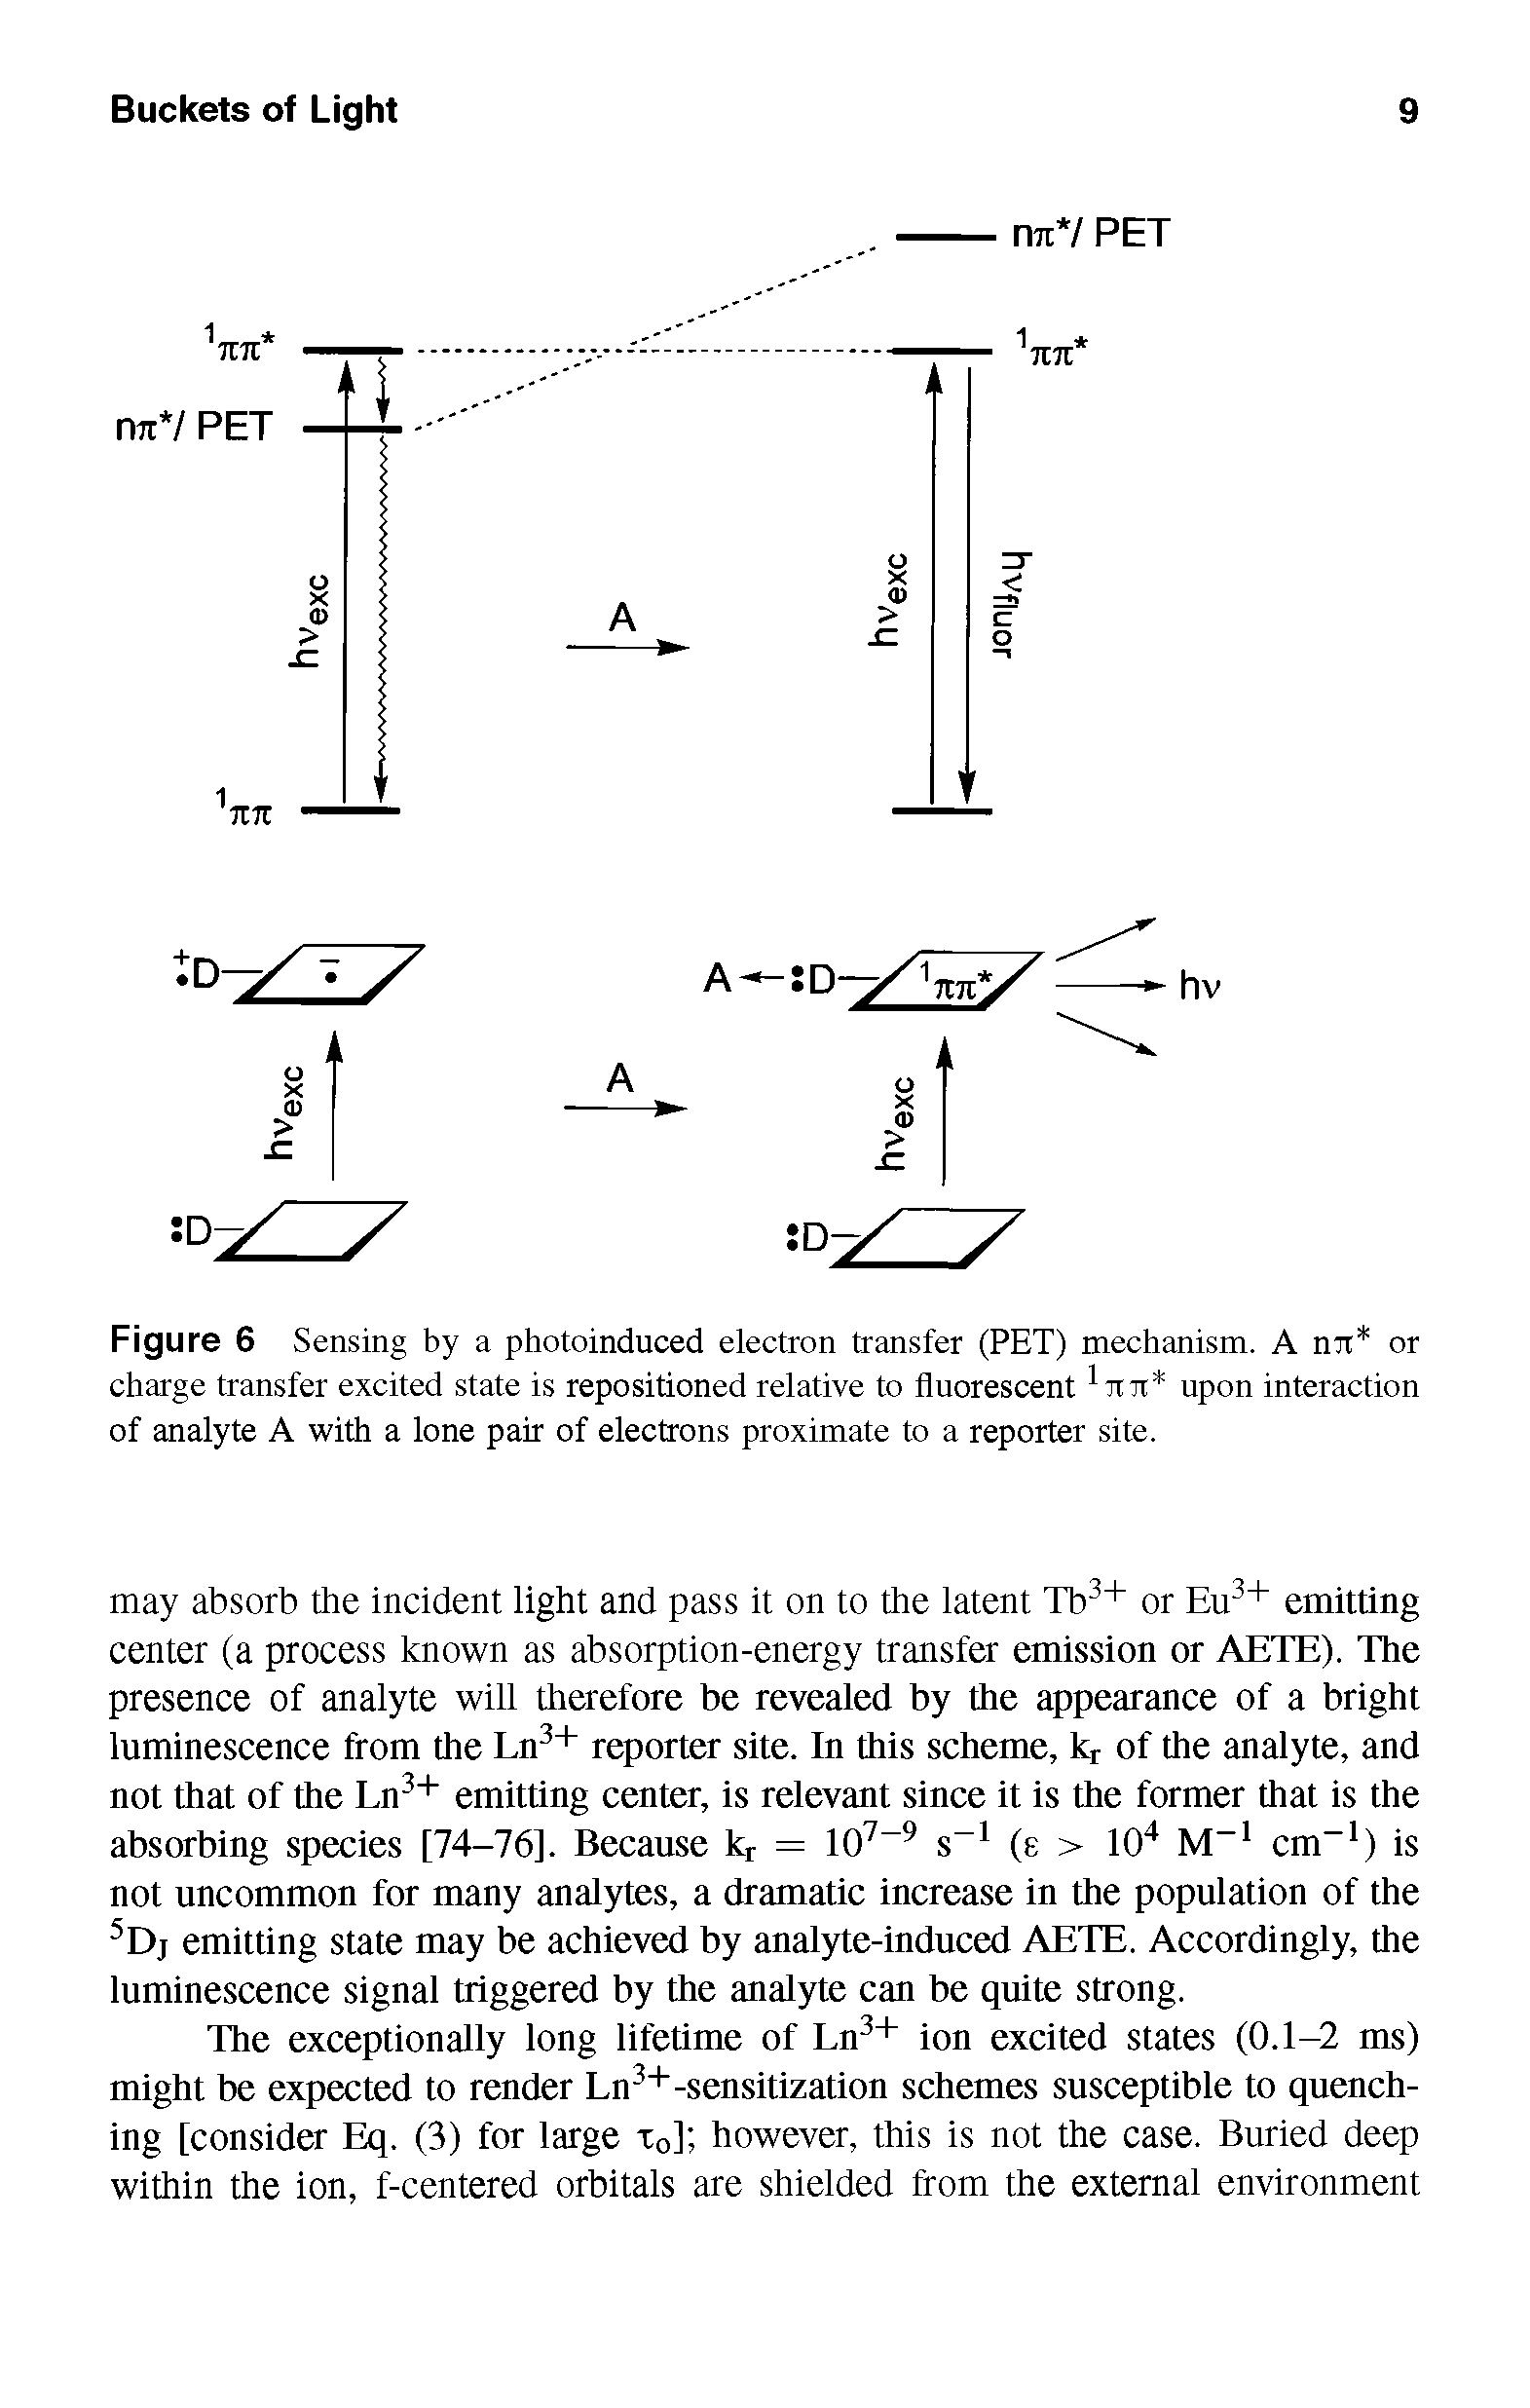 Figure 6 Sensing by a photoinduced electron transfer (PET) mechanism. A ntt or charge transfer excited state is repositioned relative to fluorescent nn upon interaction of analyte A with a lone pair of electrons proximate to a reporter site.